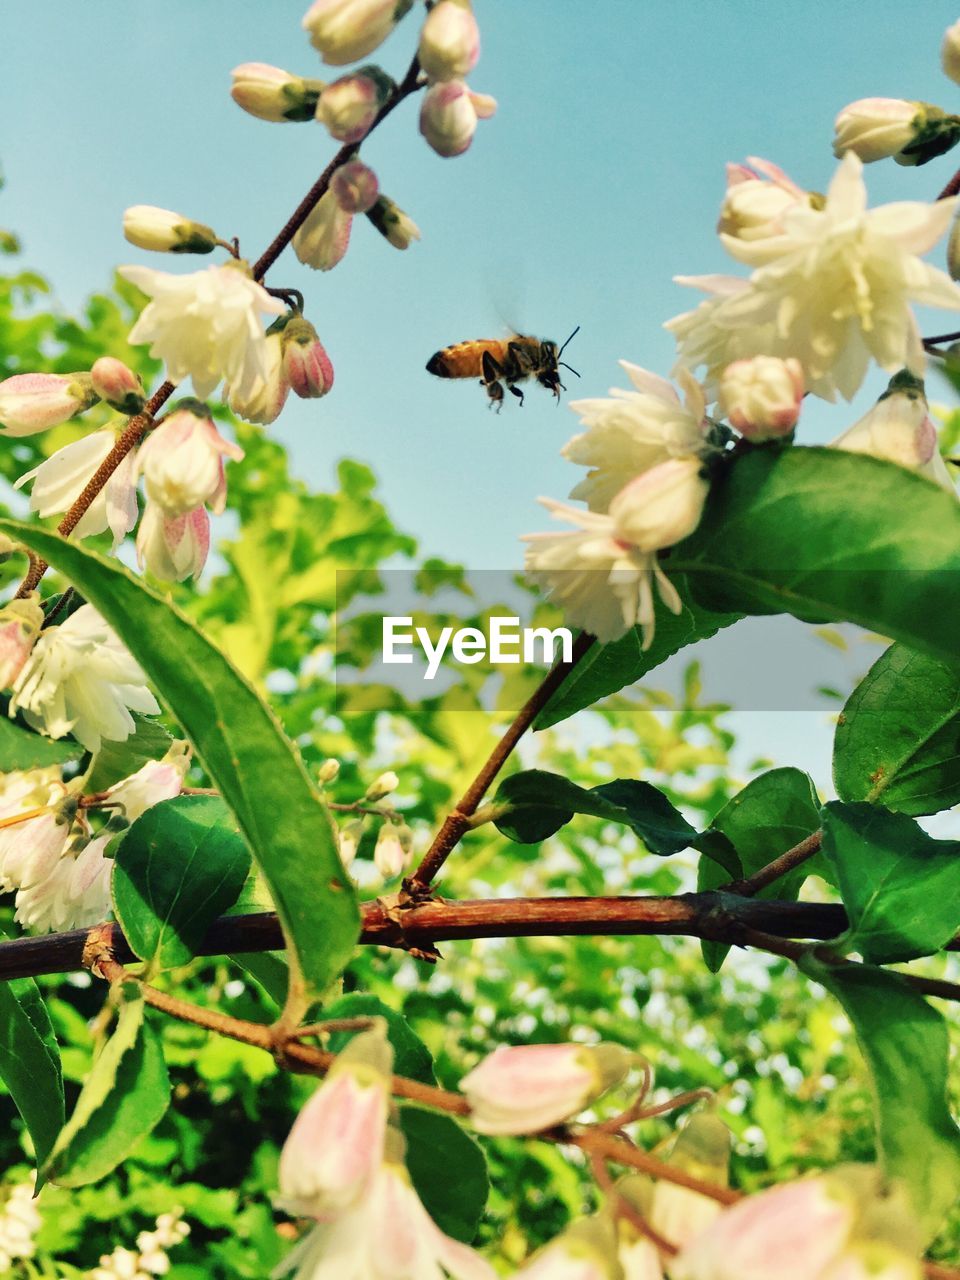 Close-up of bee flying amidst flowers blooming on tree